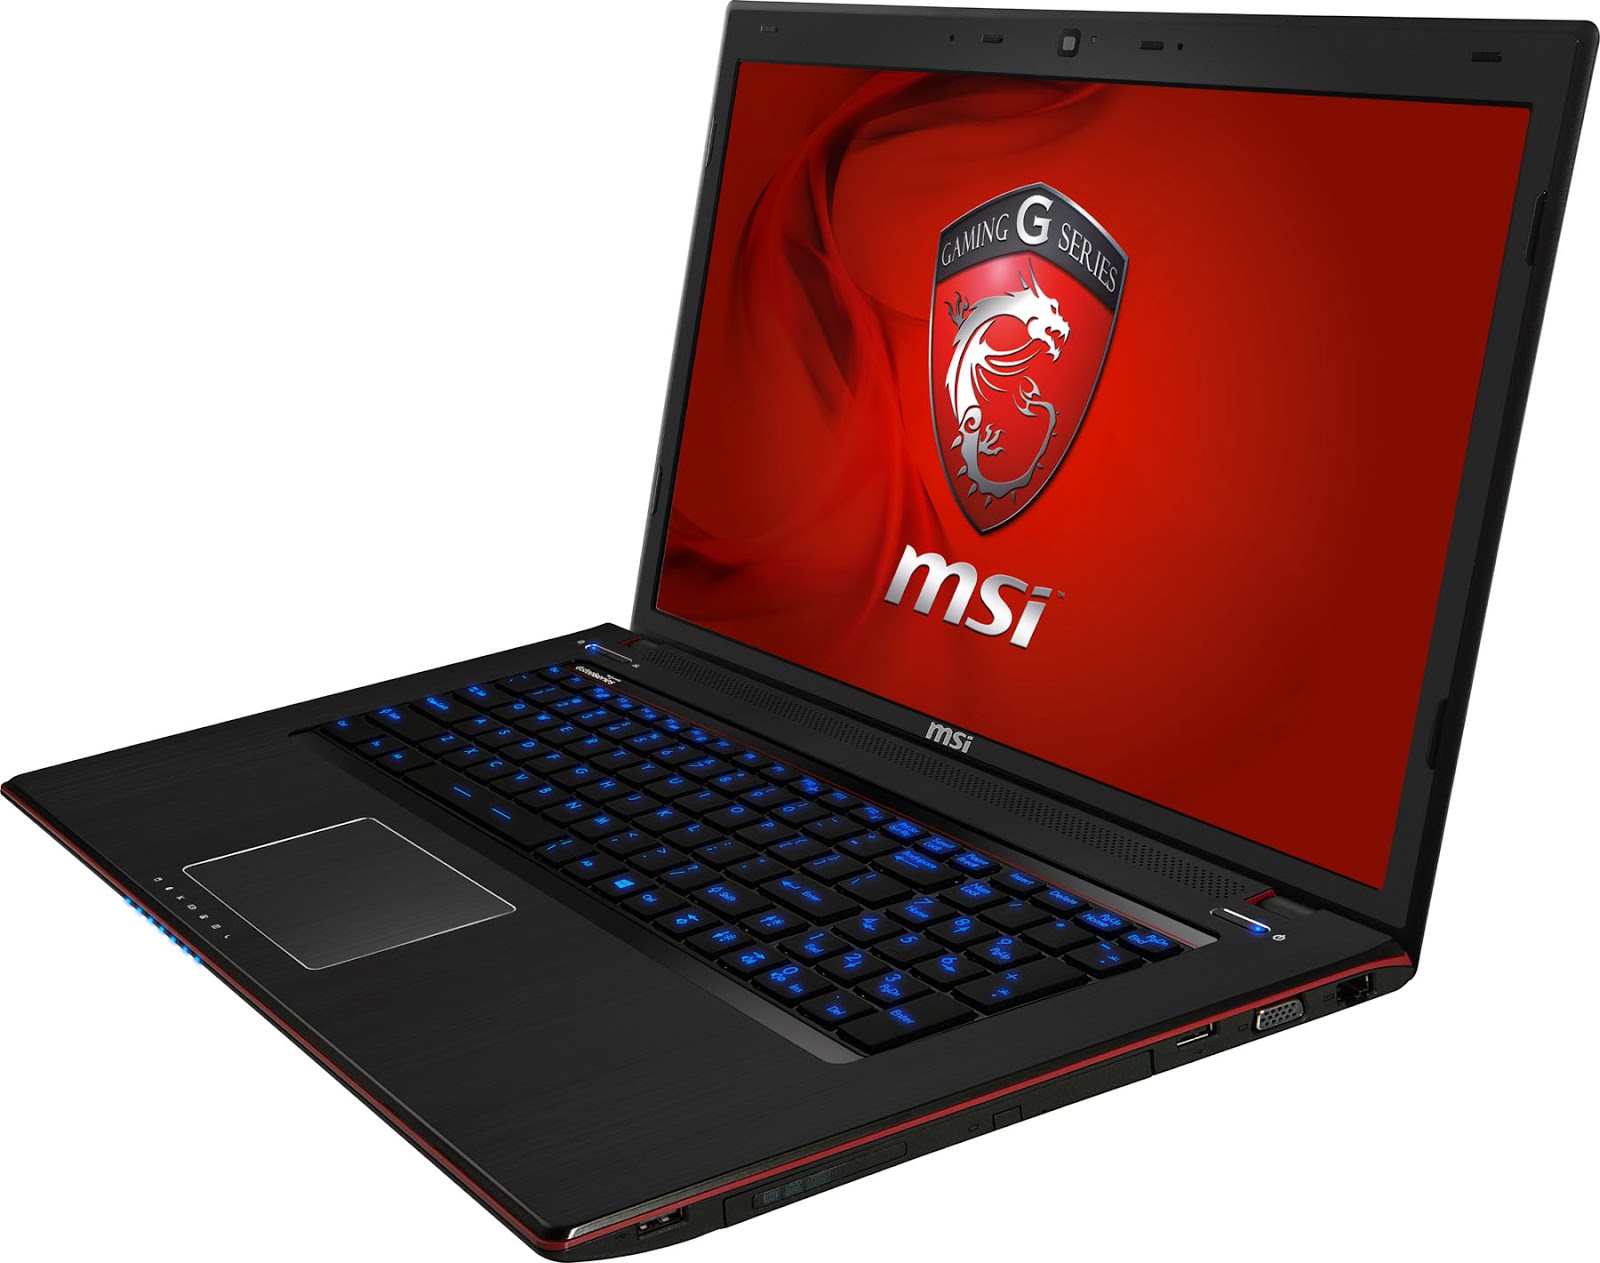 MSI GE70 Apache Pro Gaming Laptop with Full HD 17.3Inch Screen Announced